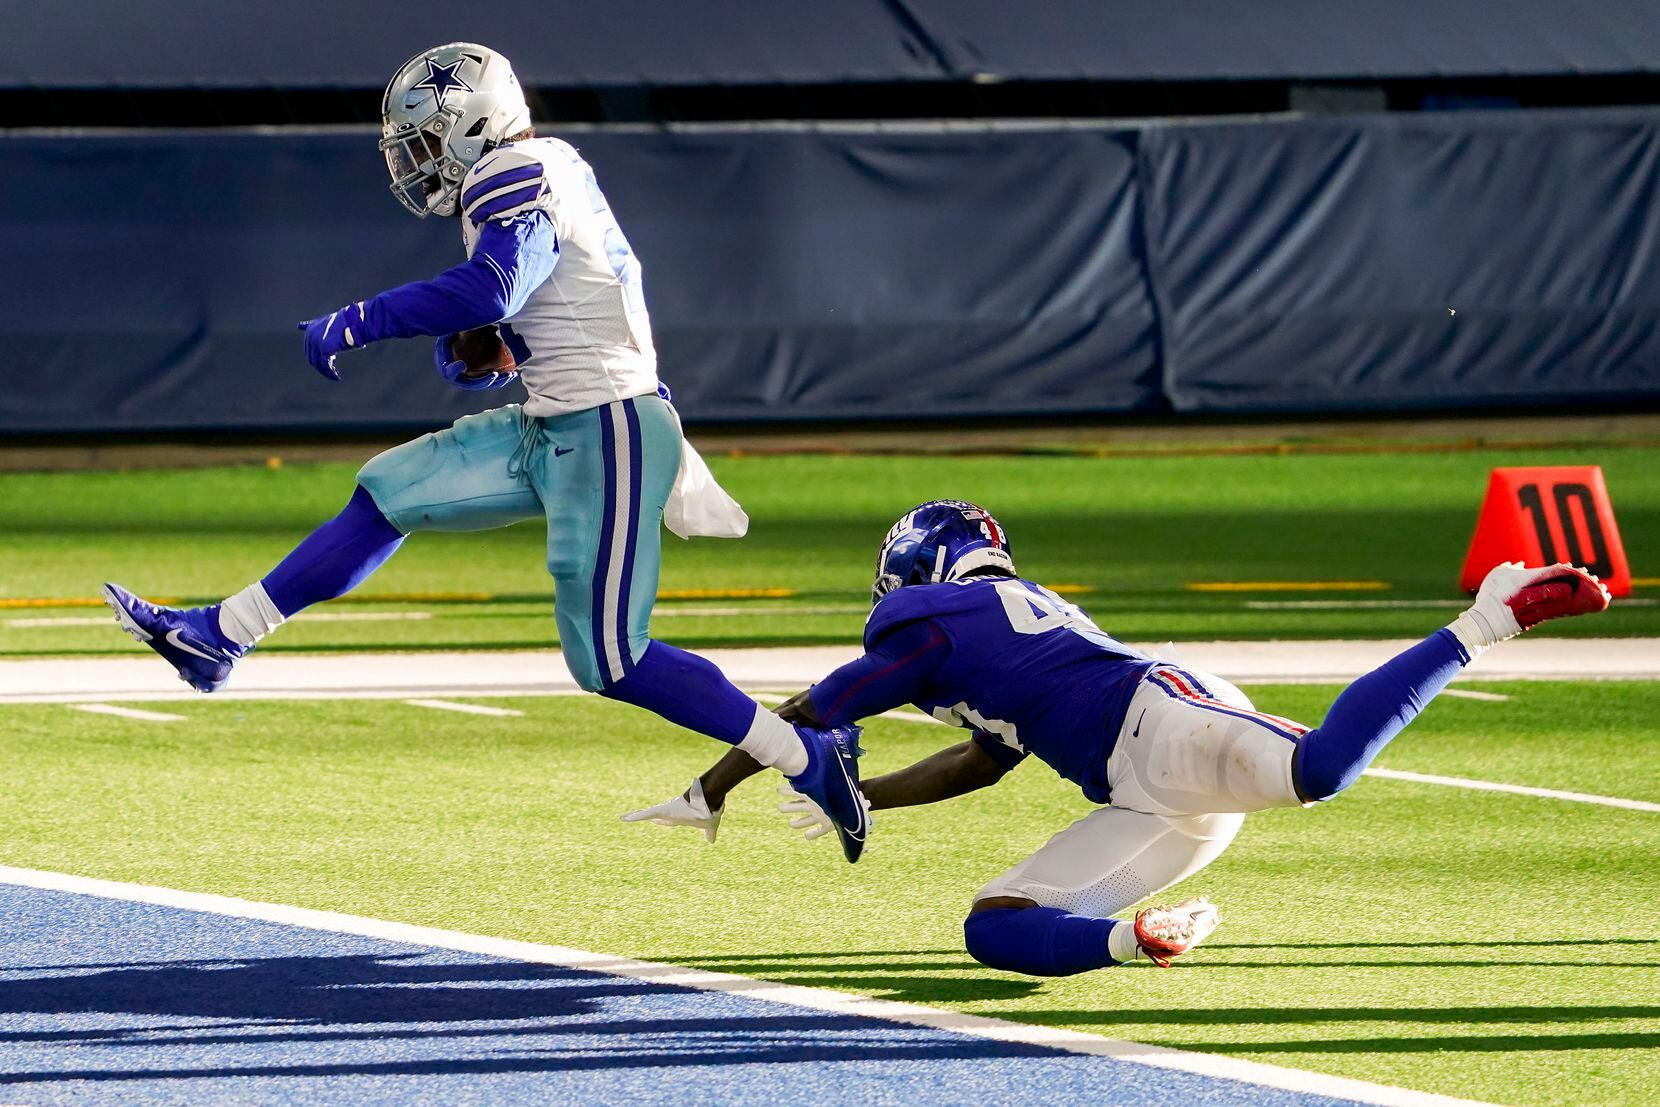 Dallas Cowboys running back Ezekiel Elliott scores past New York Giants linebacker Tae Crowder on a 12-yard touchdown run during the third quarter of an NFL football game at AT&T Stadium on Sunday, Oct. 11, 2020, in Arlington. (Smiley N. Pool/The Dallas Morning News)